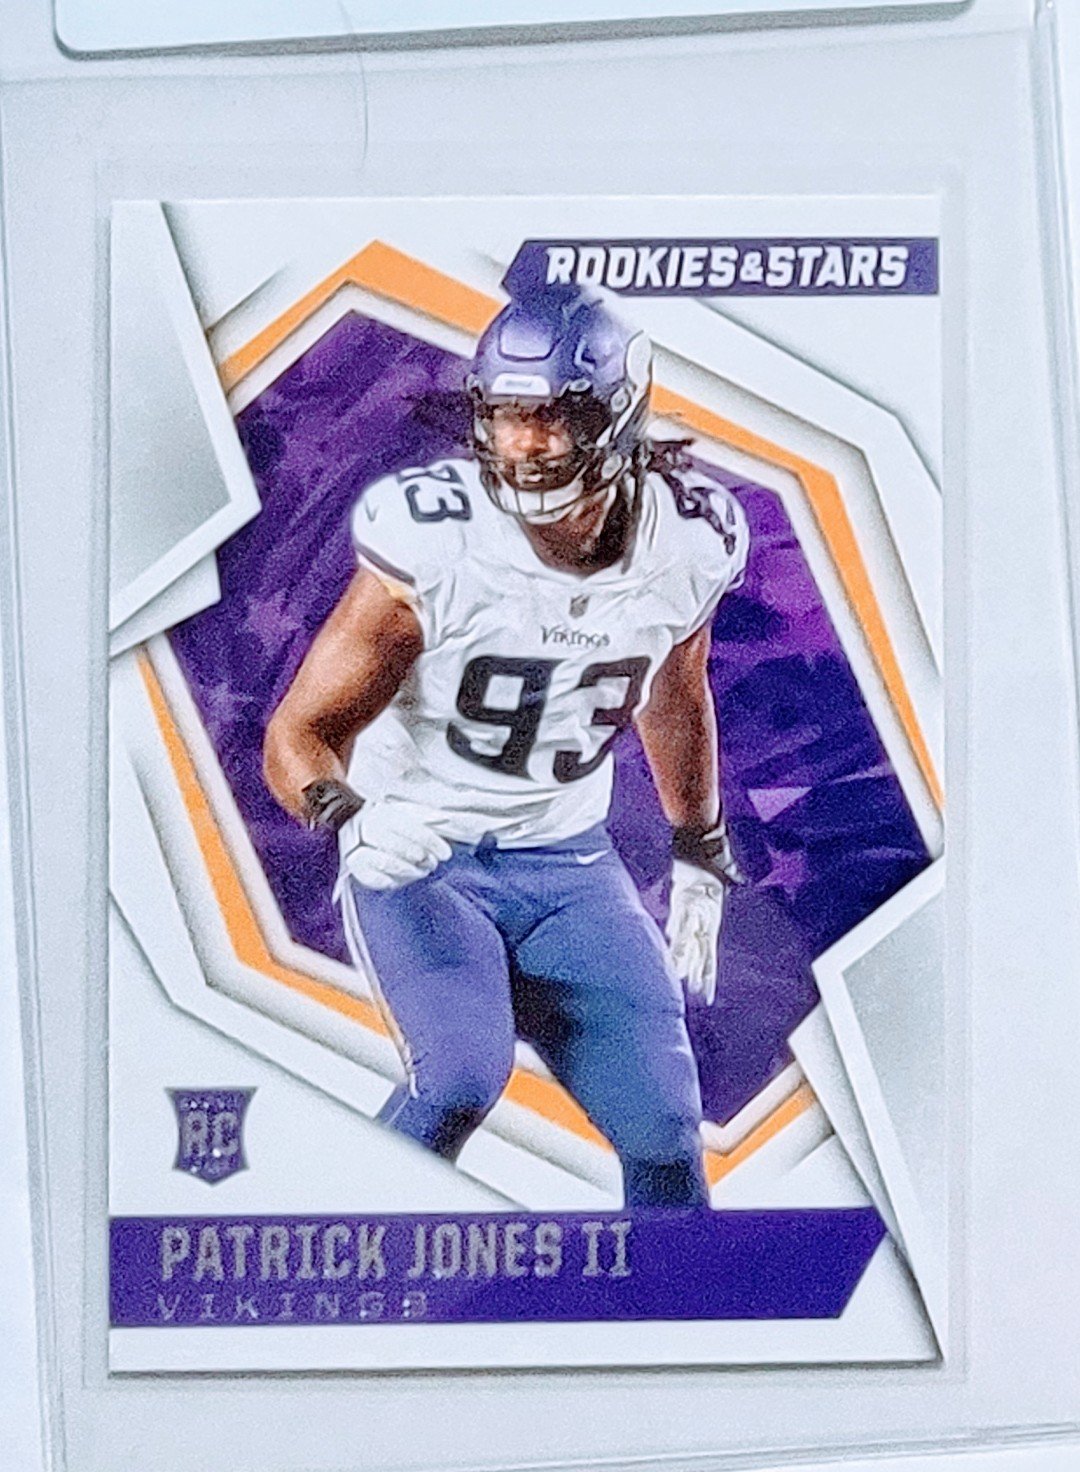 2021 Panini Rookies and Stars Patrick Jones II Rookie Football Card AVM1_1a simple Xclusive Collectibles   